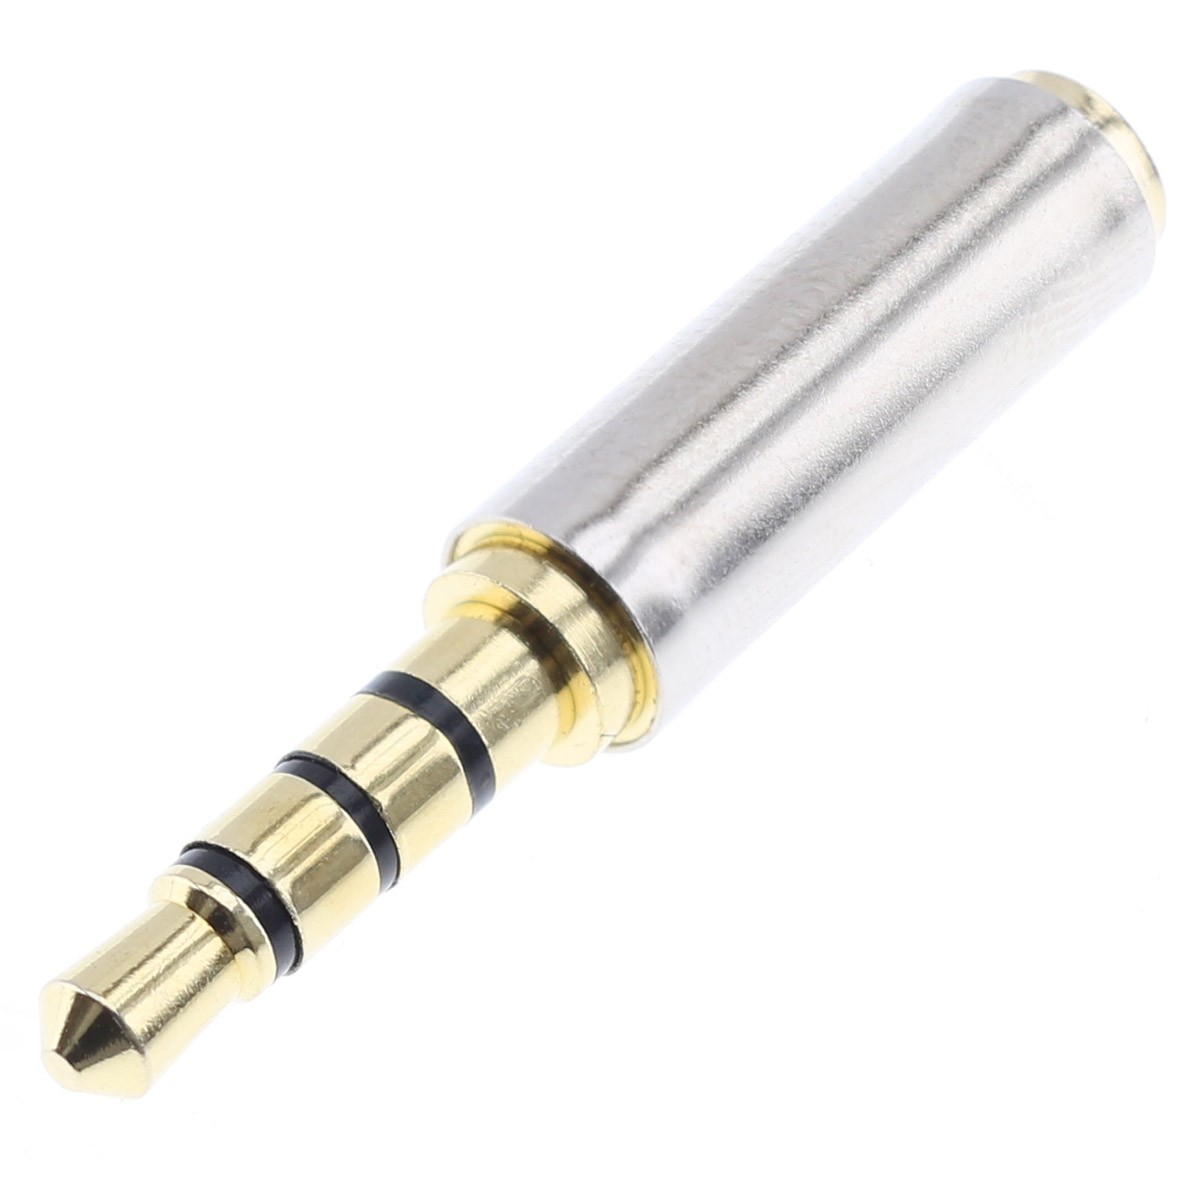 Adapter Female TRRS Jack 2.5mm to Male TRRS Jack 3.5mm Gold Plated